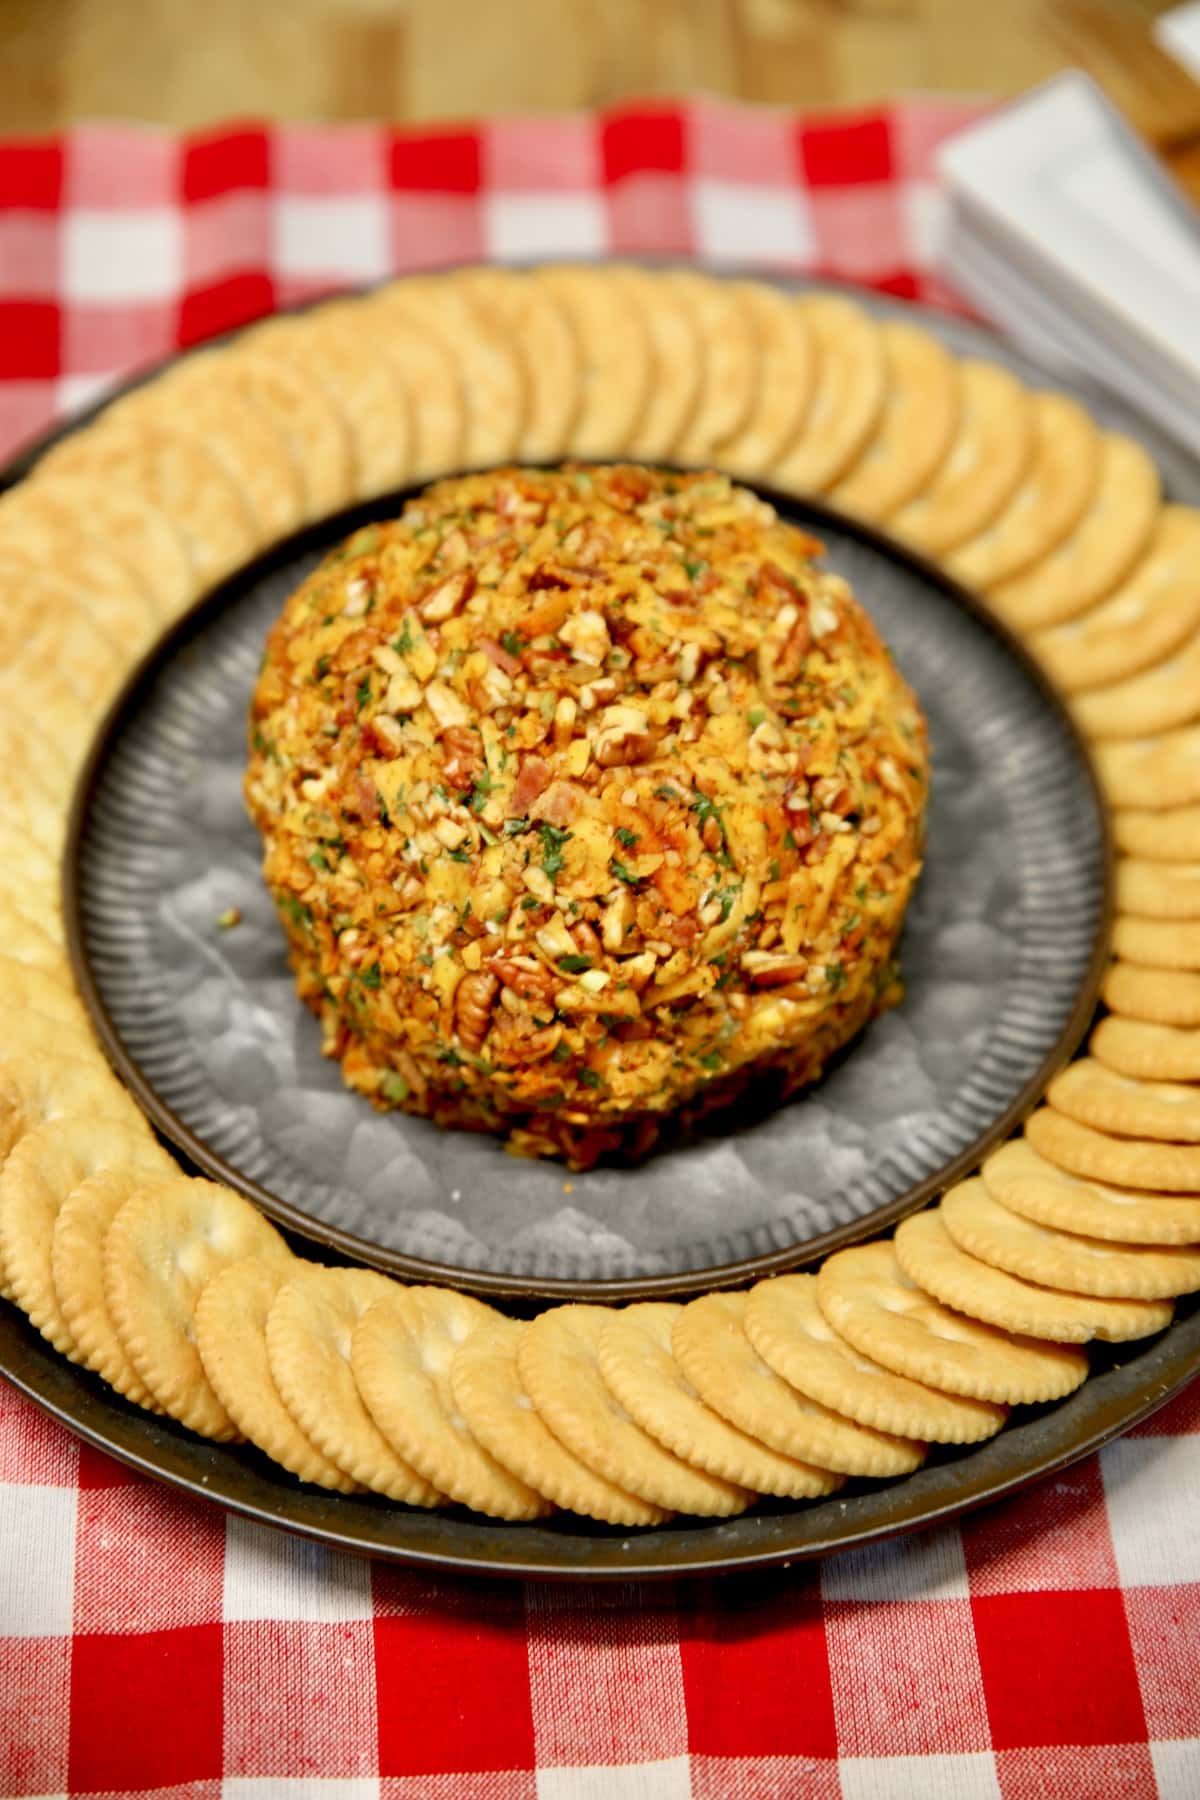 Jalapeno popper cheeseball on a platter with crackers.